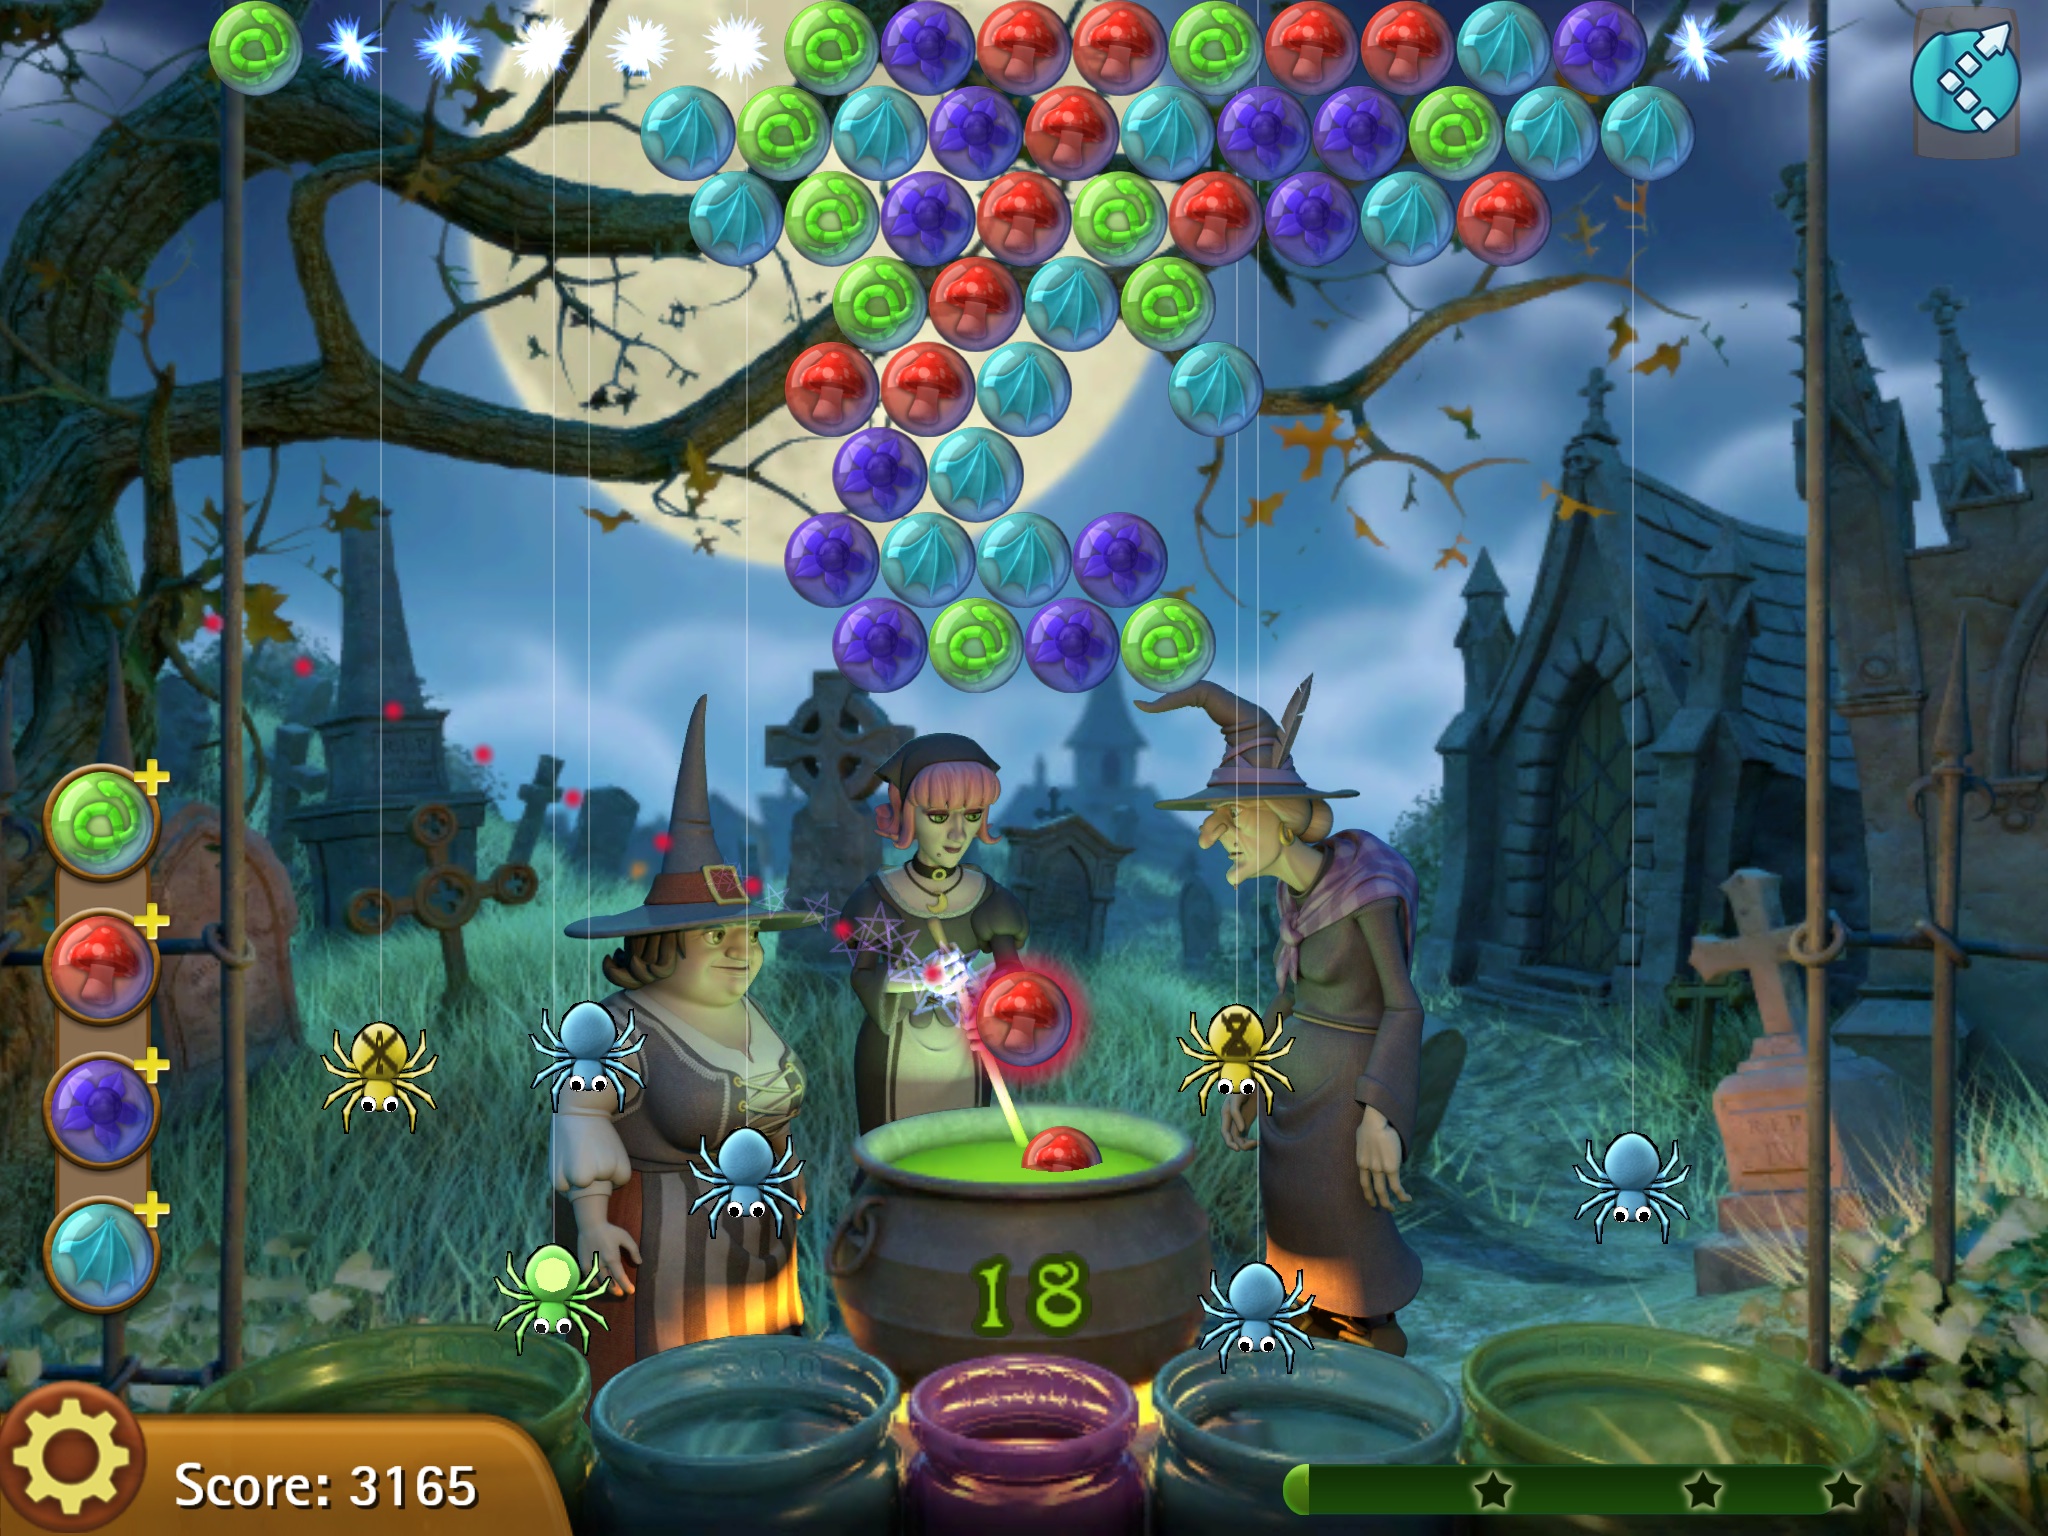 Bubble Witch Saga: Top 10 tips, hints, and cheats you need to know!